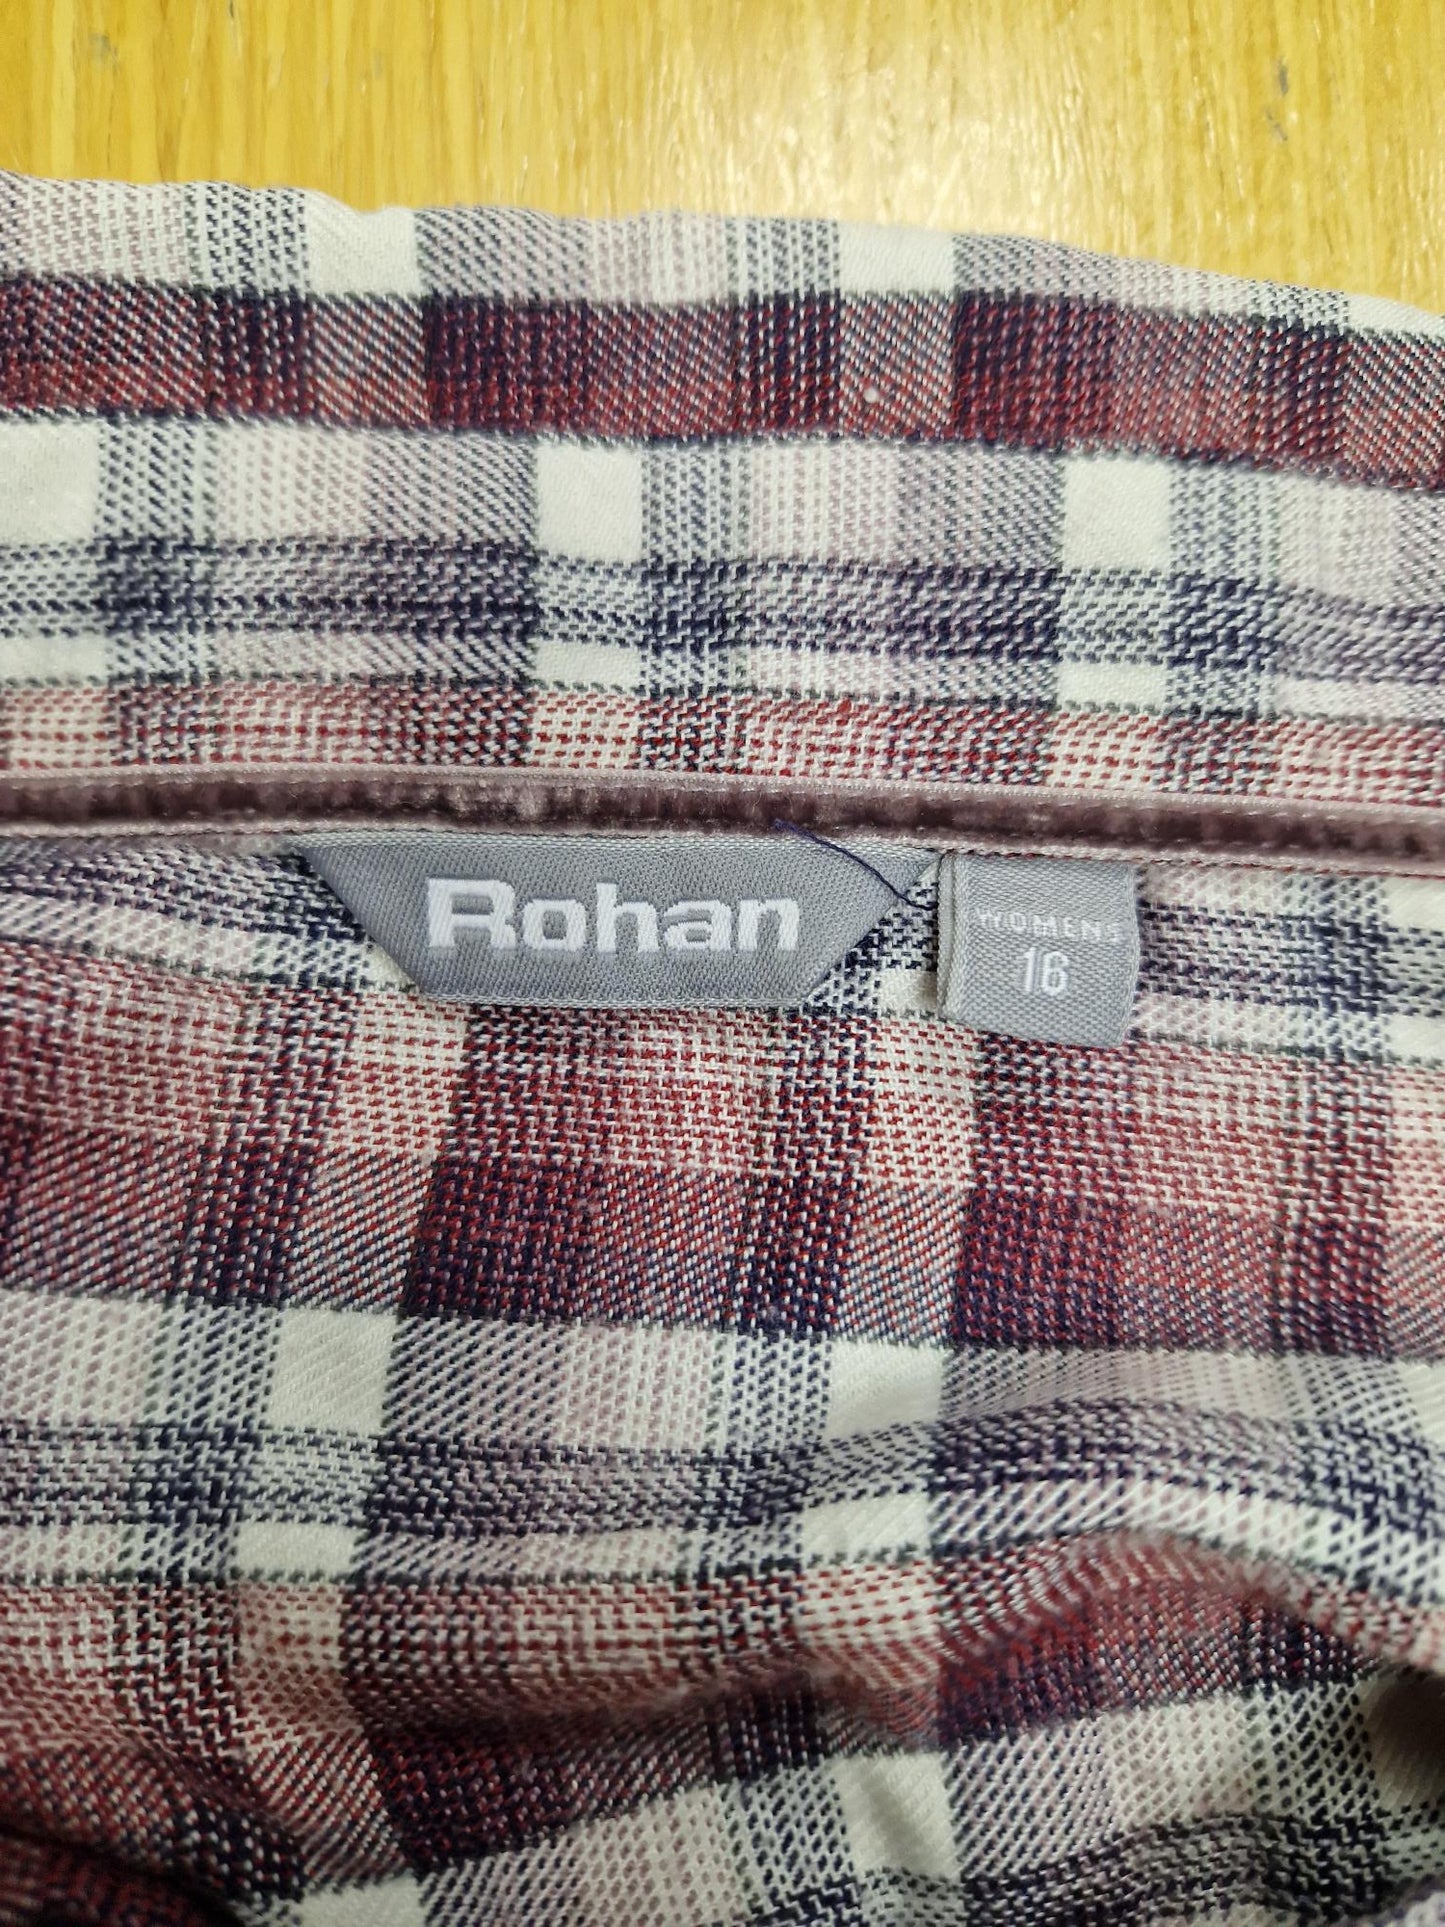 Rohan Ladies checked Shirt in Pink, White and Purple - Size 16